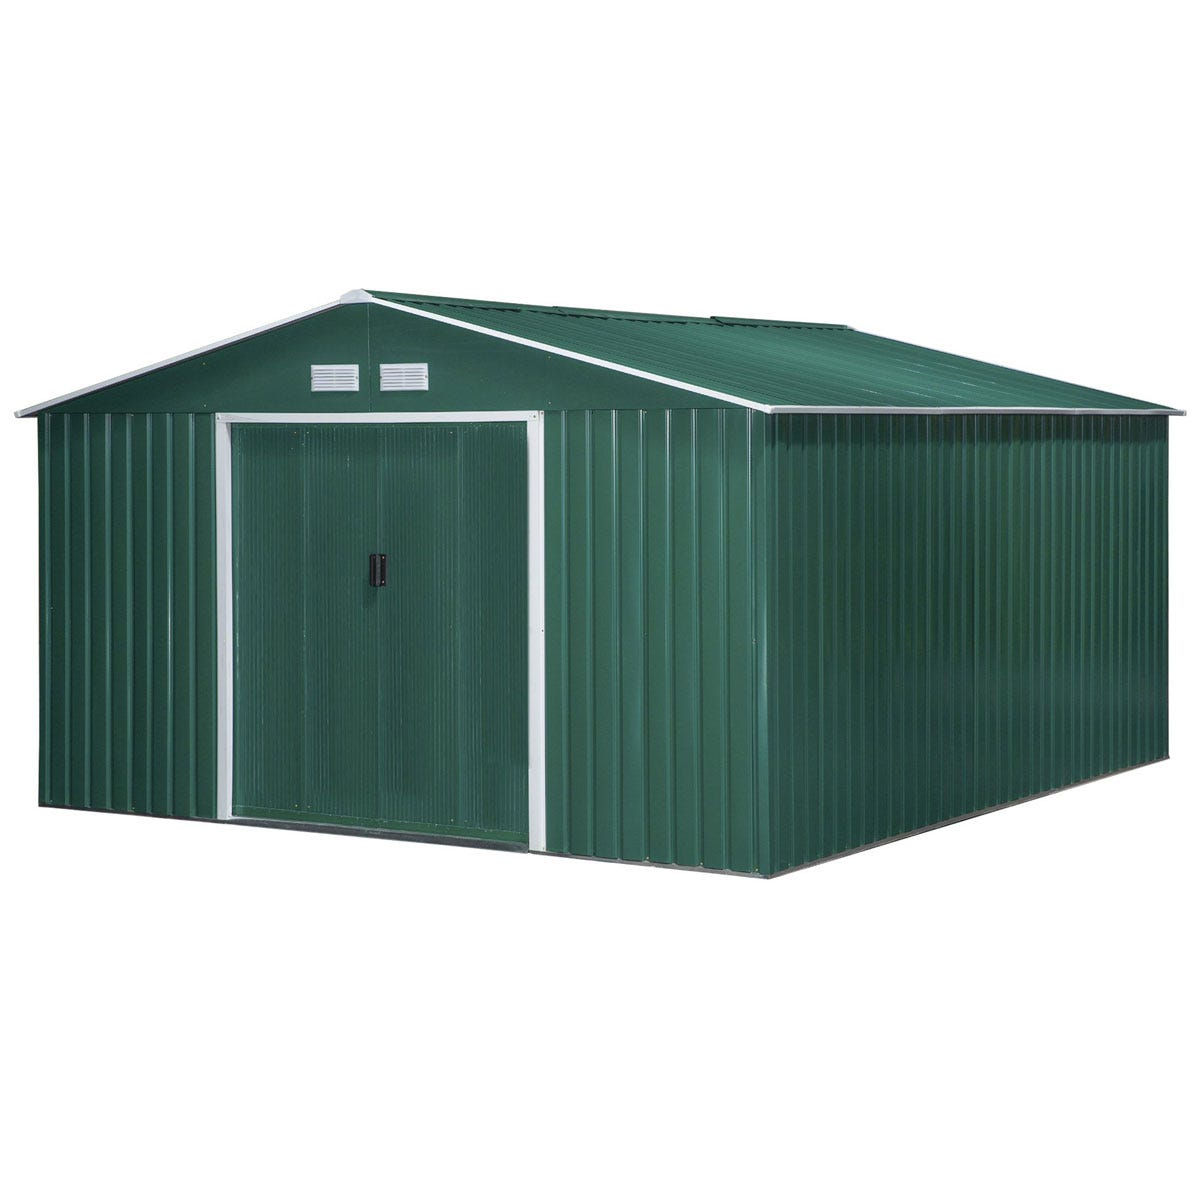 Outsunny 13 x 11Ft Garden Storage Shed W/2 Doors Galvanised Metal Green